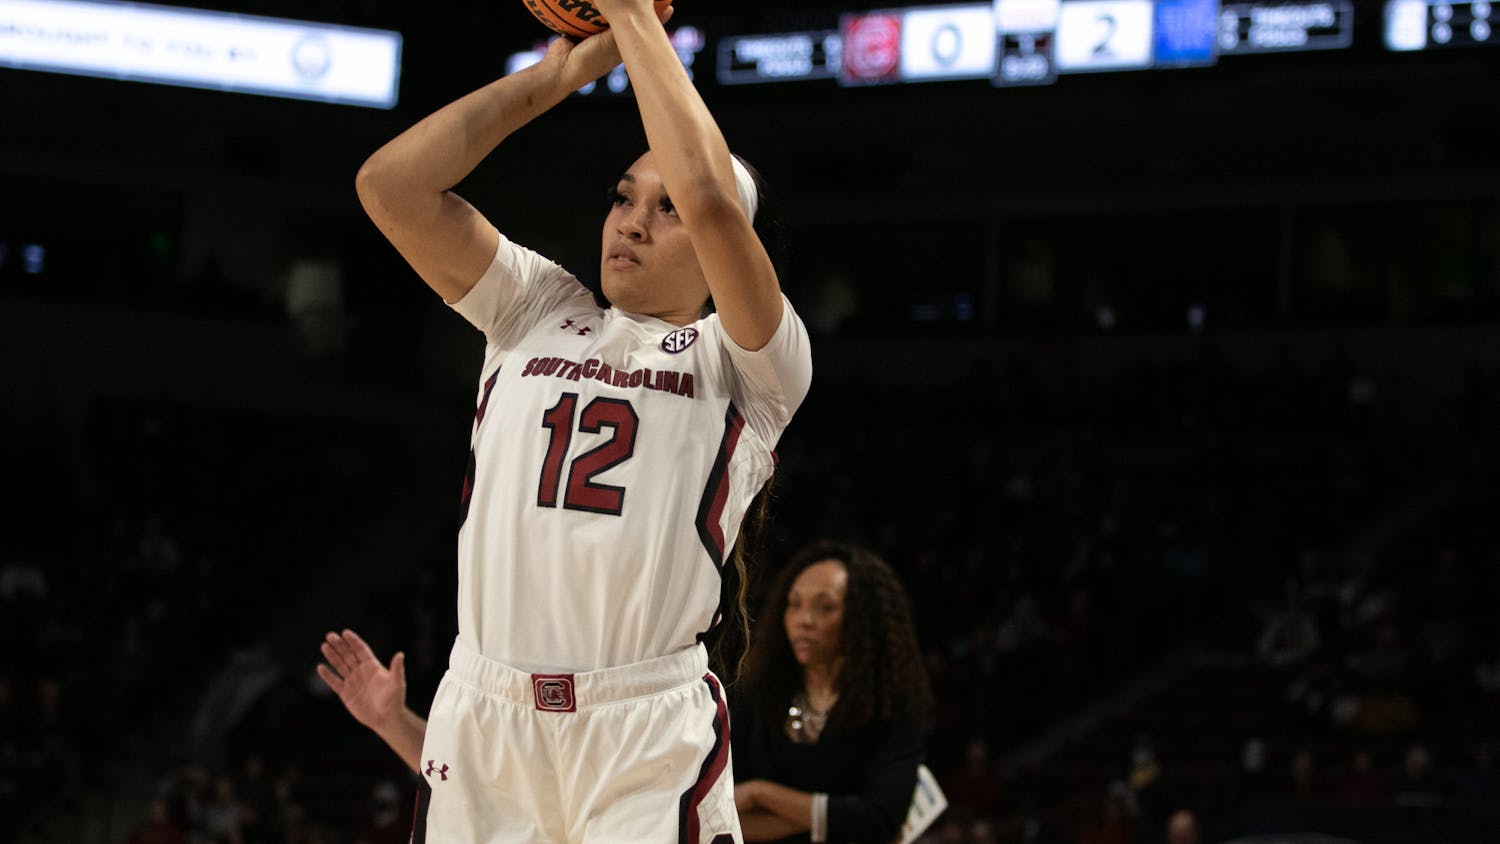 Senior guard Brea Beal shoots a three-pointer to make the score 3-2 in the first quarter against Kentucky at Colonial Life Arena on Feb. 2, 2023. The South Carolina Gamecocks beat the Wildcats for the second time this season 87-69.